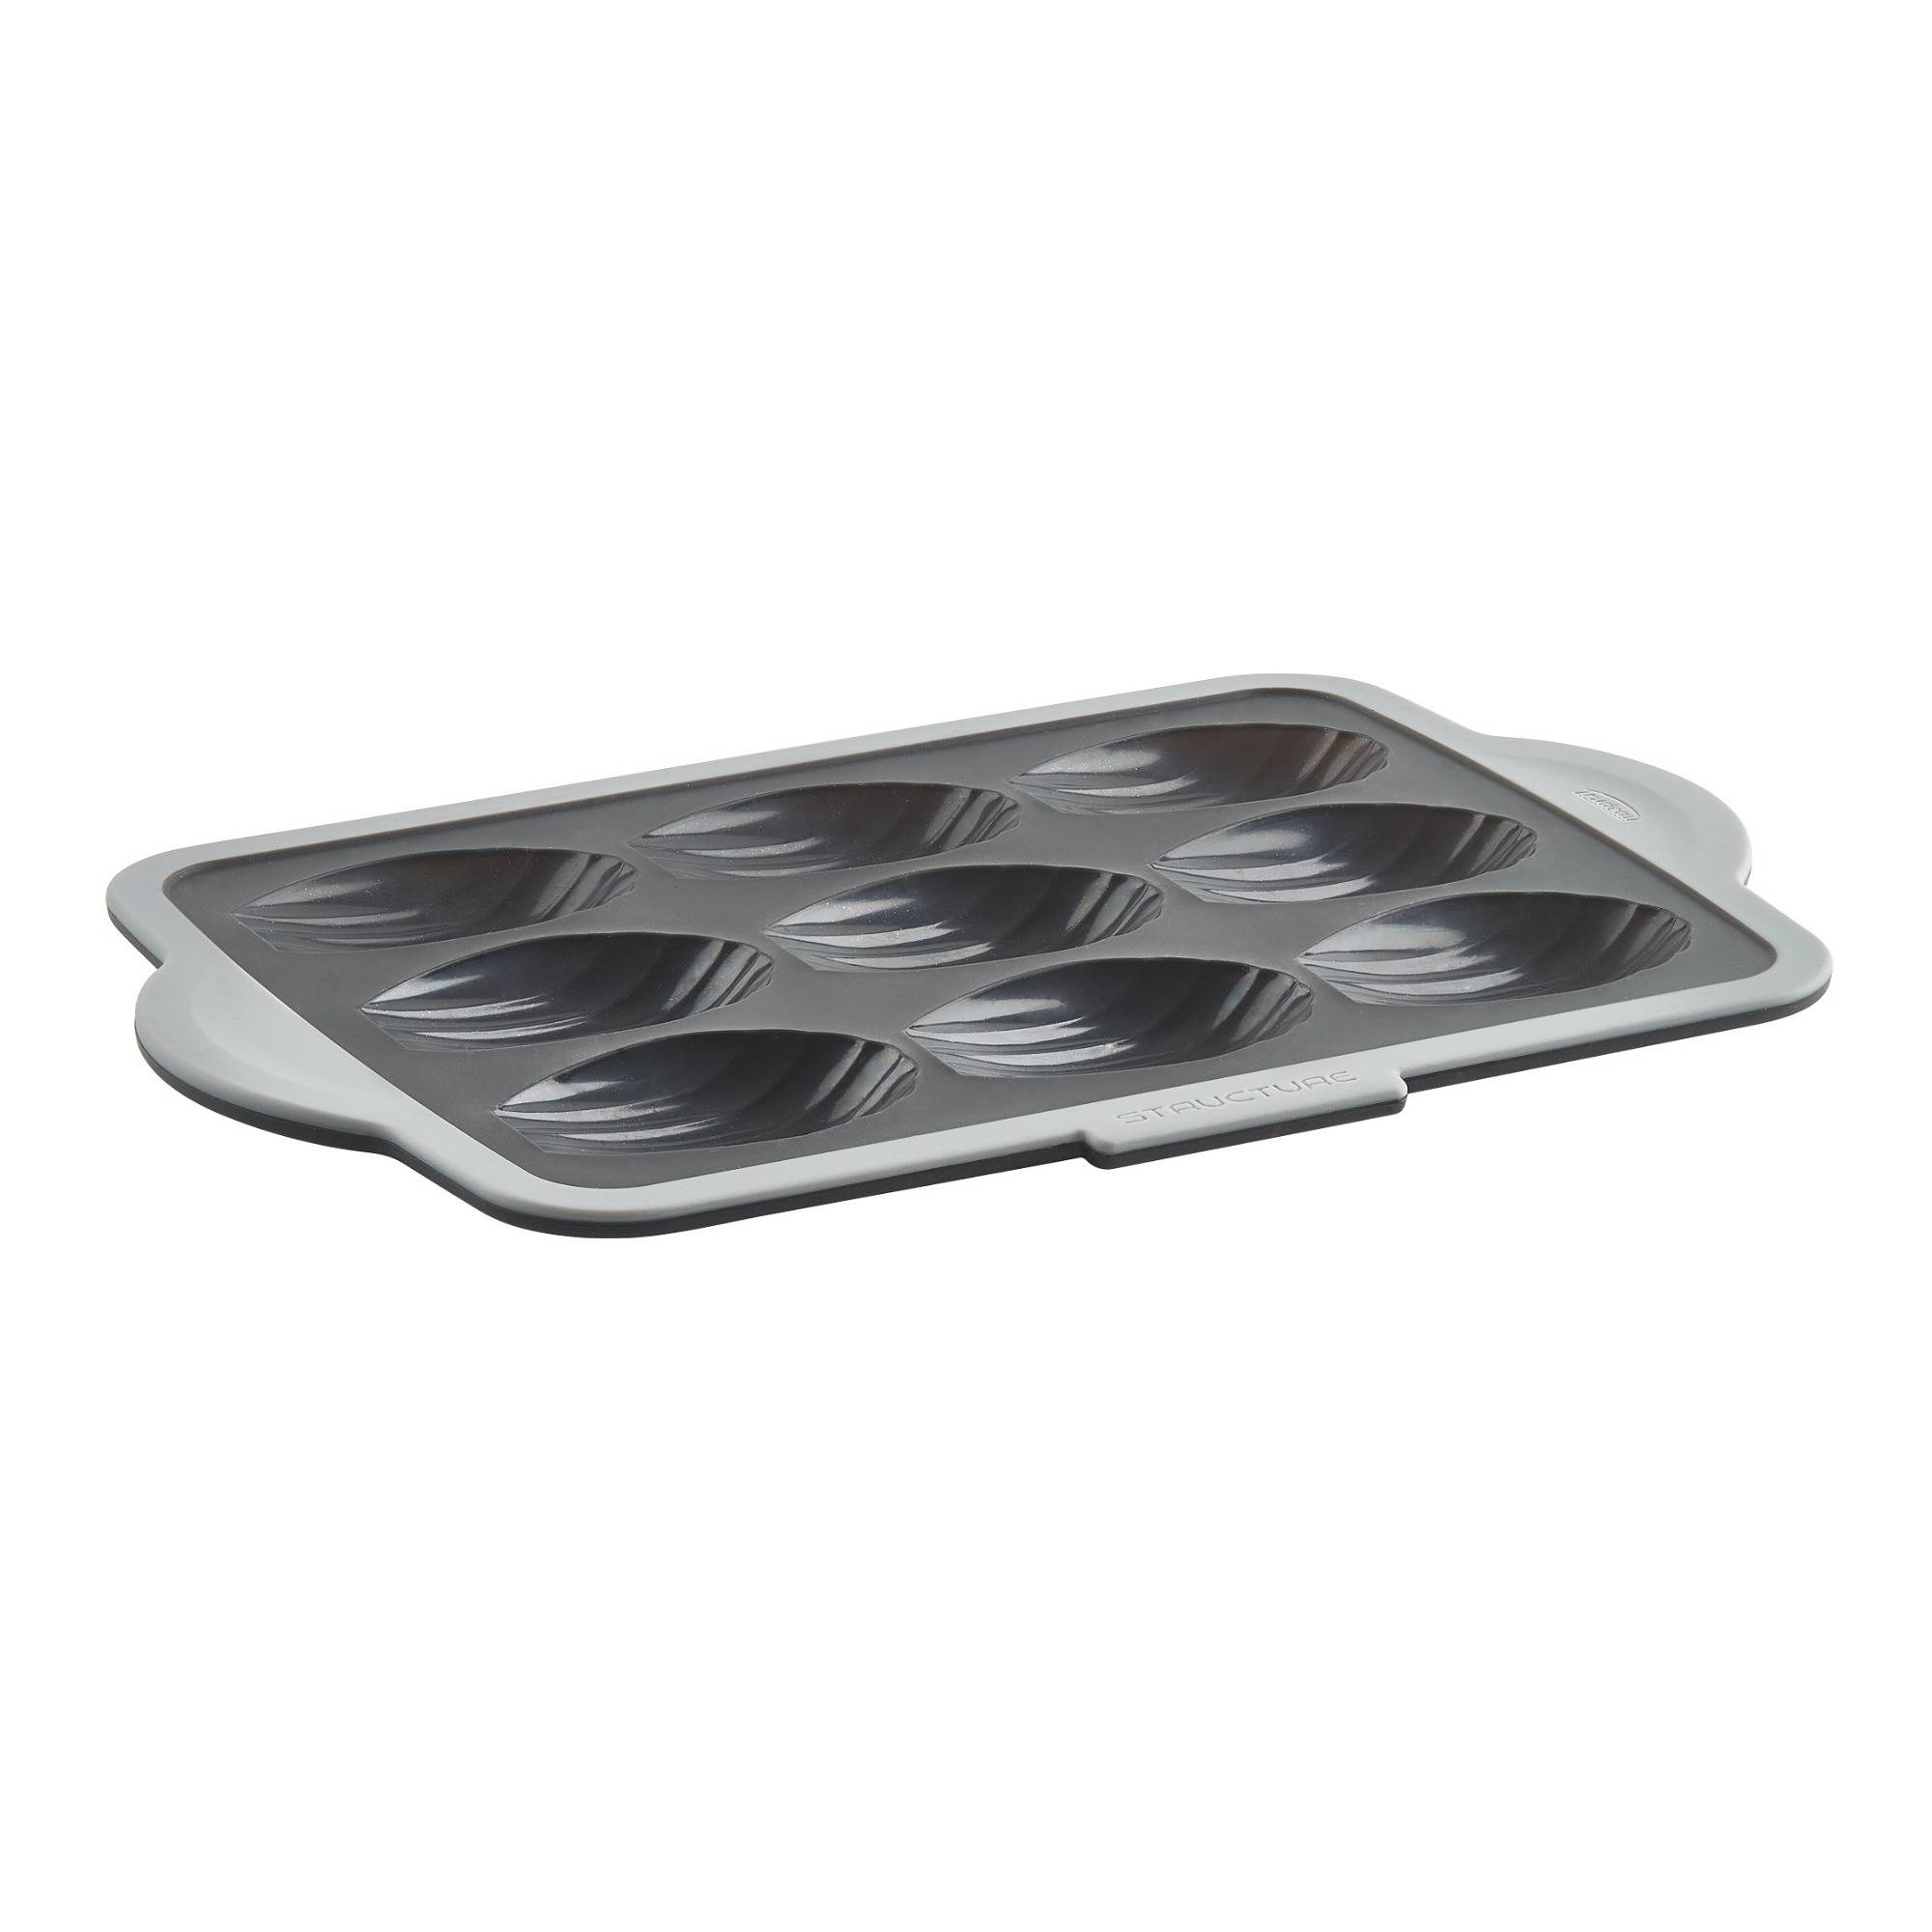 Trudeau Structured Silicone 9 Count Madeleine Pan (Black/Gray)